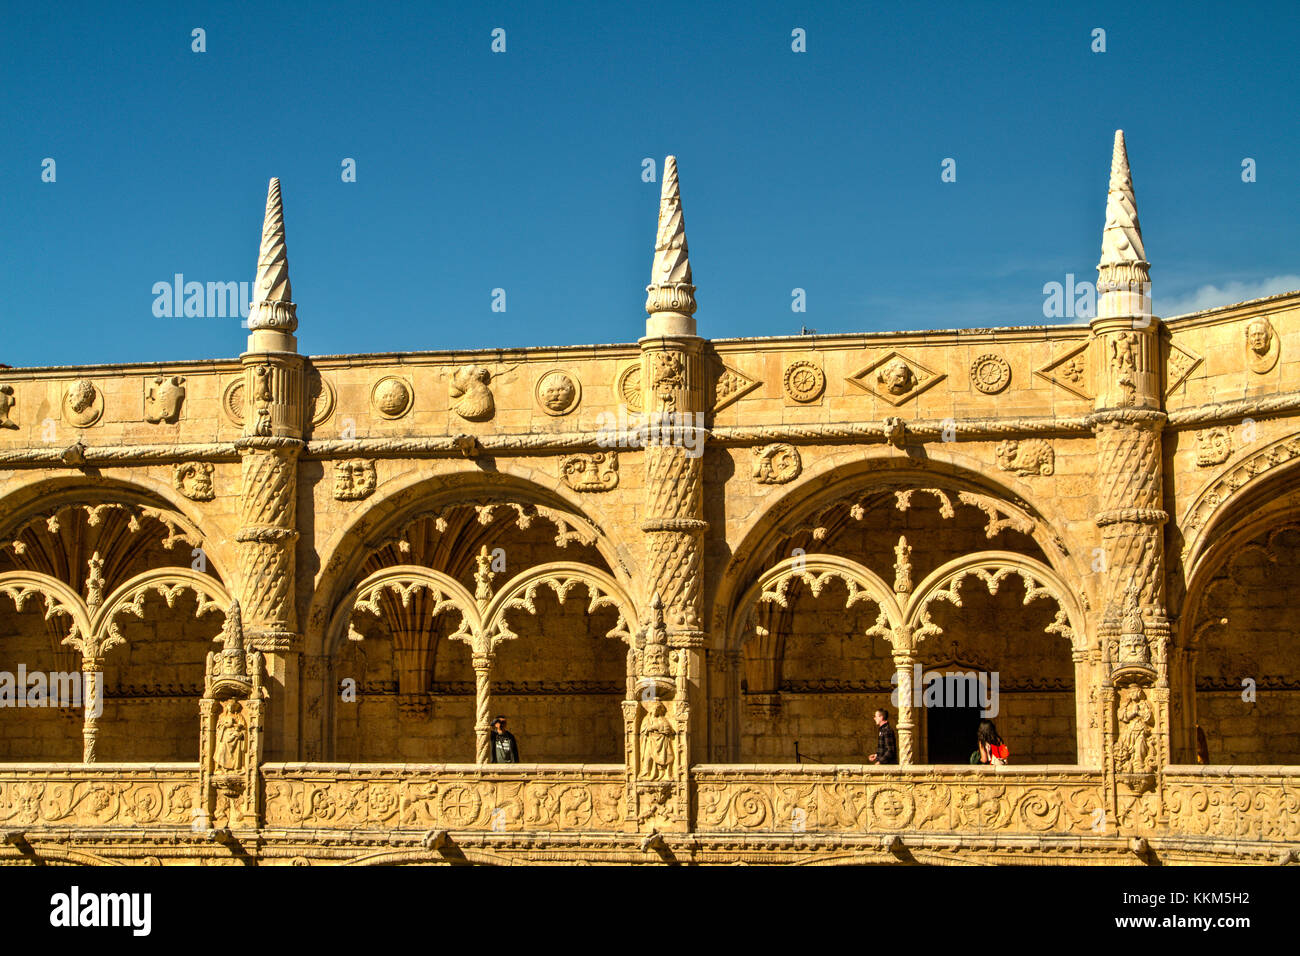 A section of  the cloisters in Jeronimos Monastery in Lisbon, Portugal, showing the characteristic detailed carvings of Manueline architecture. Stock Photo